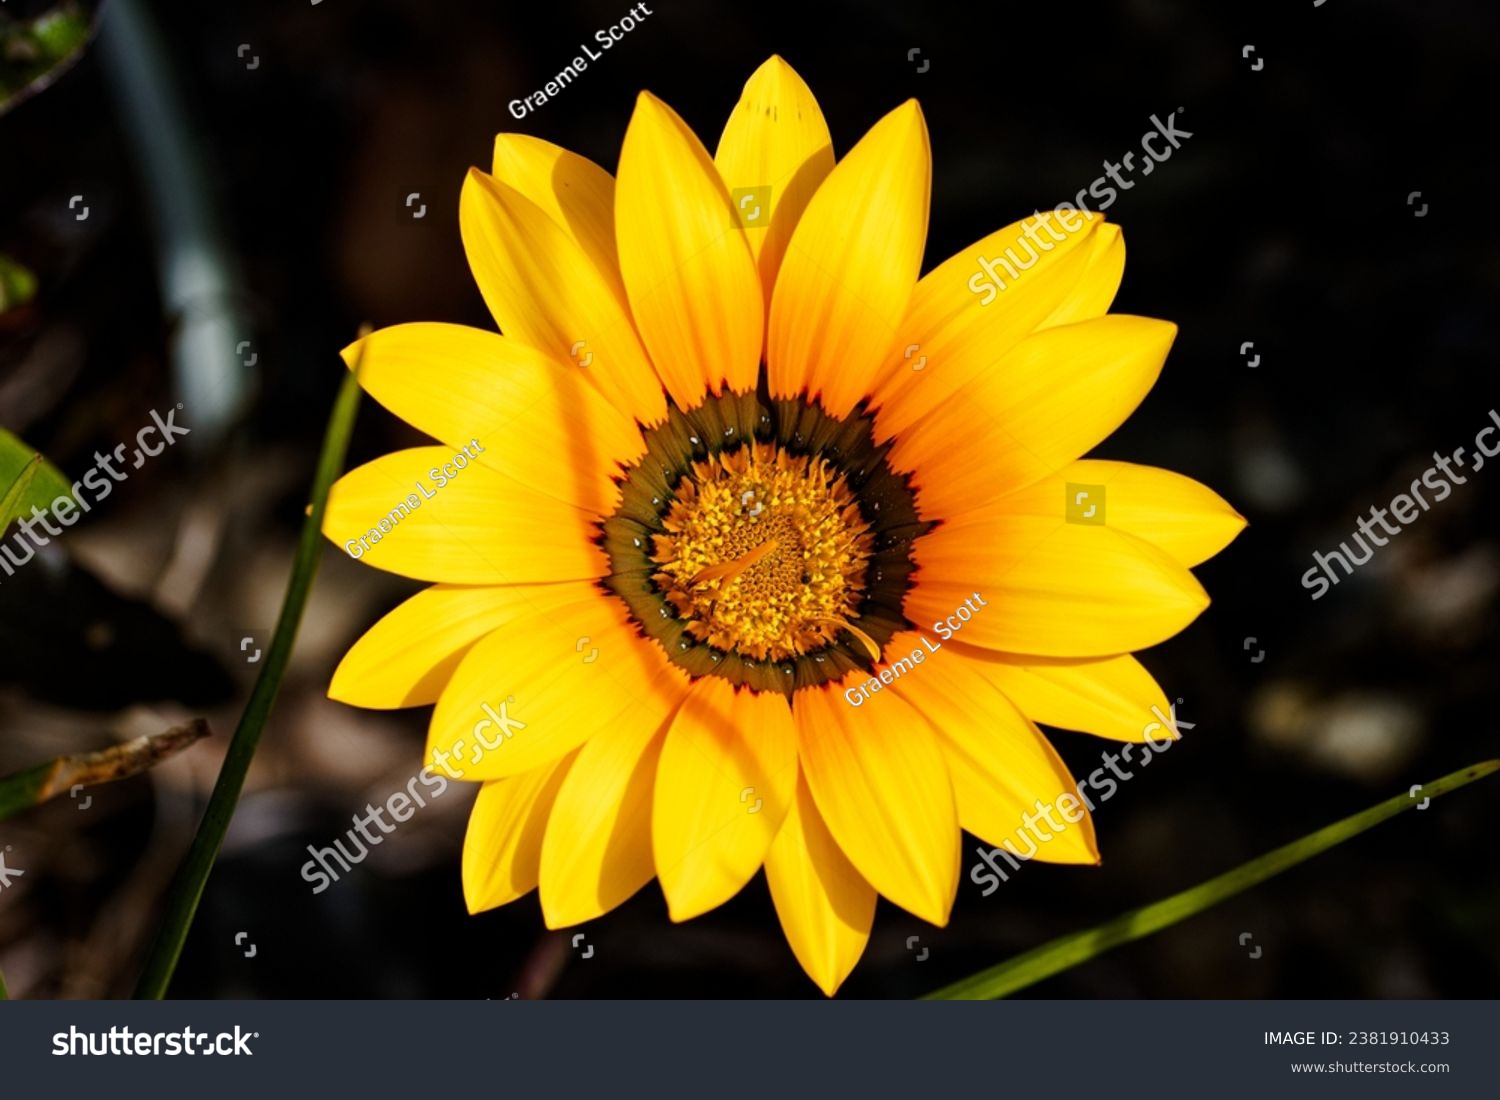 Gazania krebsiana is a species of flowering plant in family Asteraceae.  It is one of some 19 species of Gazania that are exclusively African and predominantly South African . #2381910433